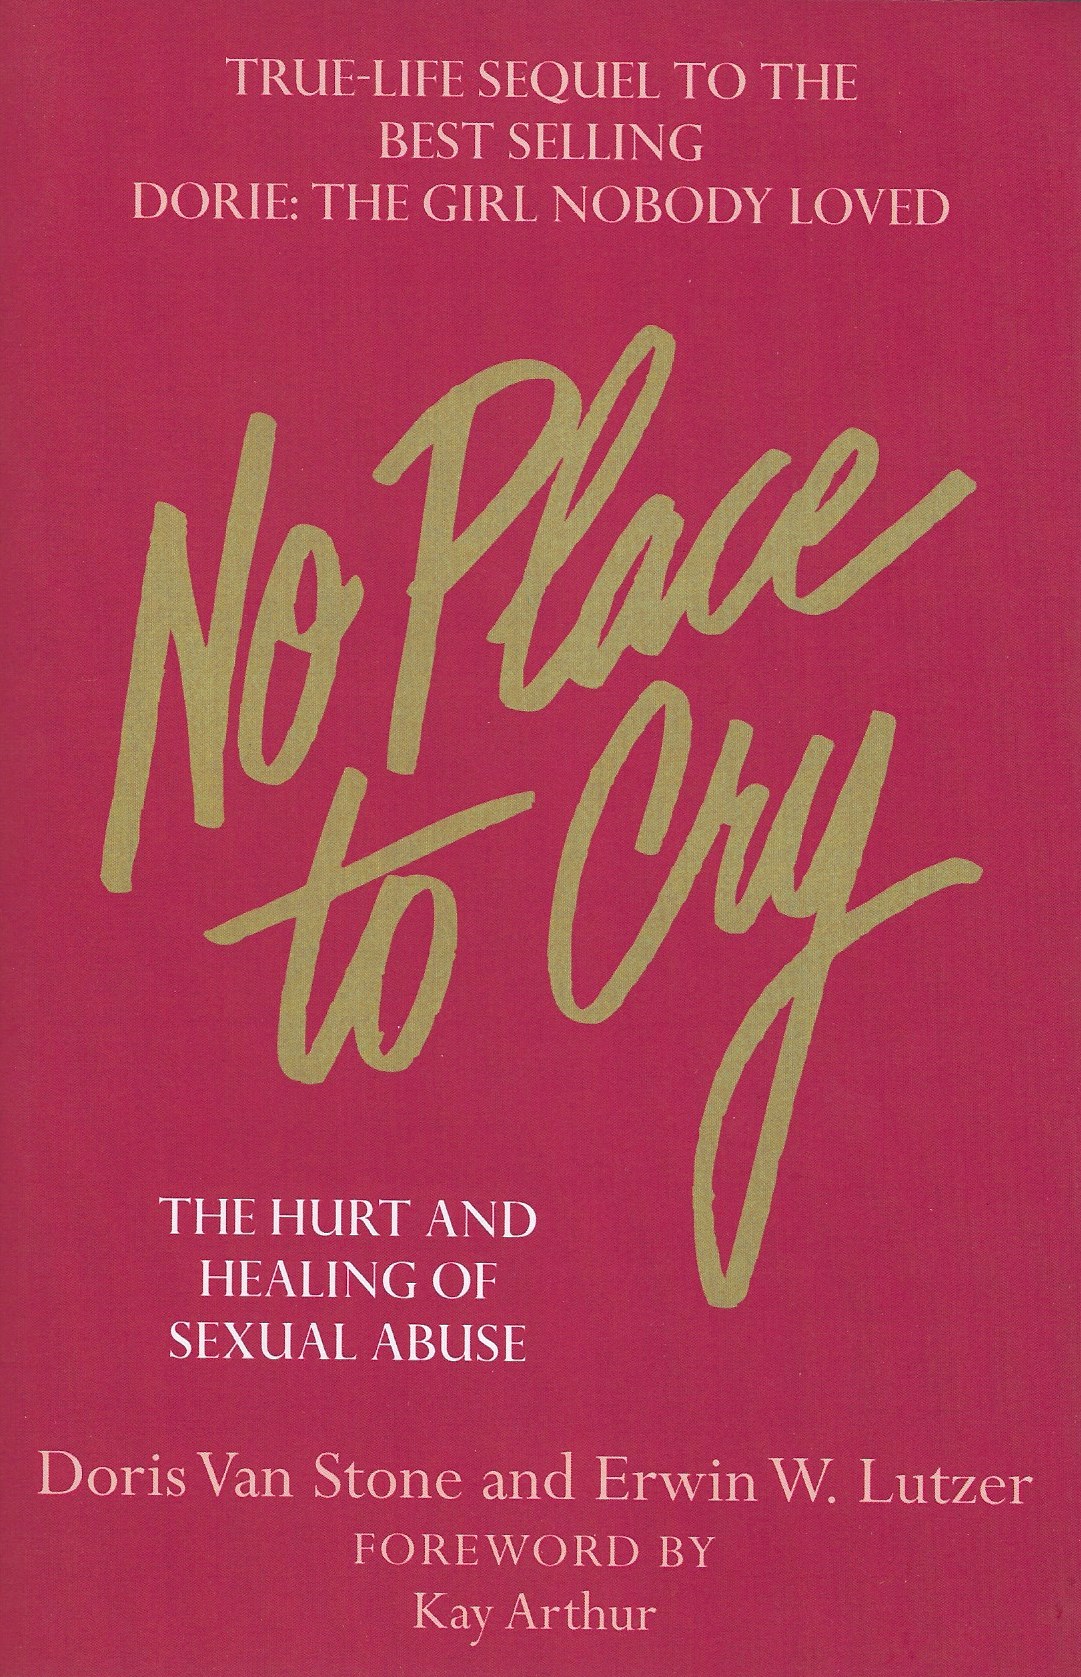 NO PLACE TO CRY Dorie Van Stone - Click Image to Close